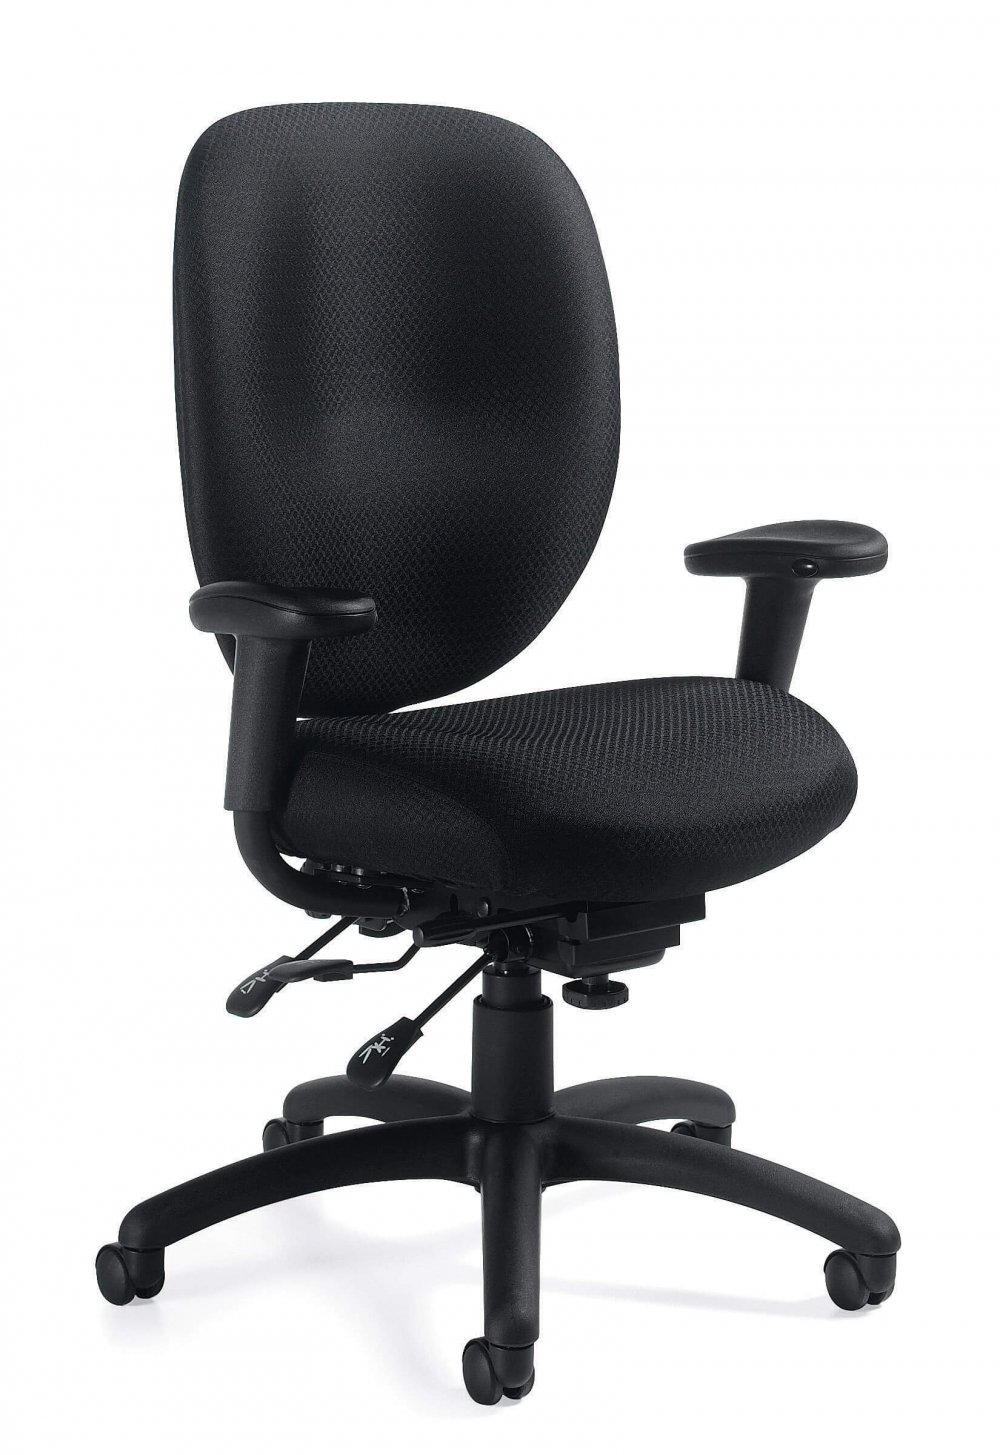 office-furniture-chairs-fabric-office-chairs.jpg